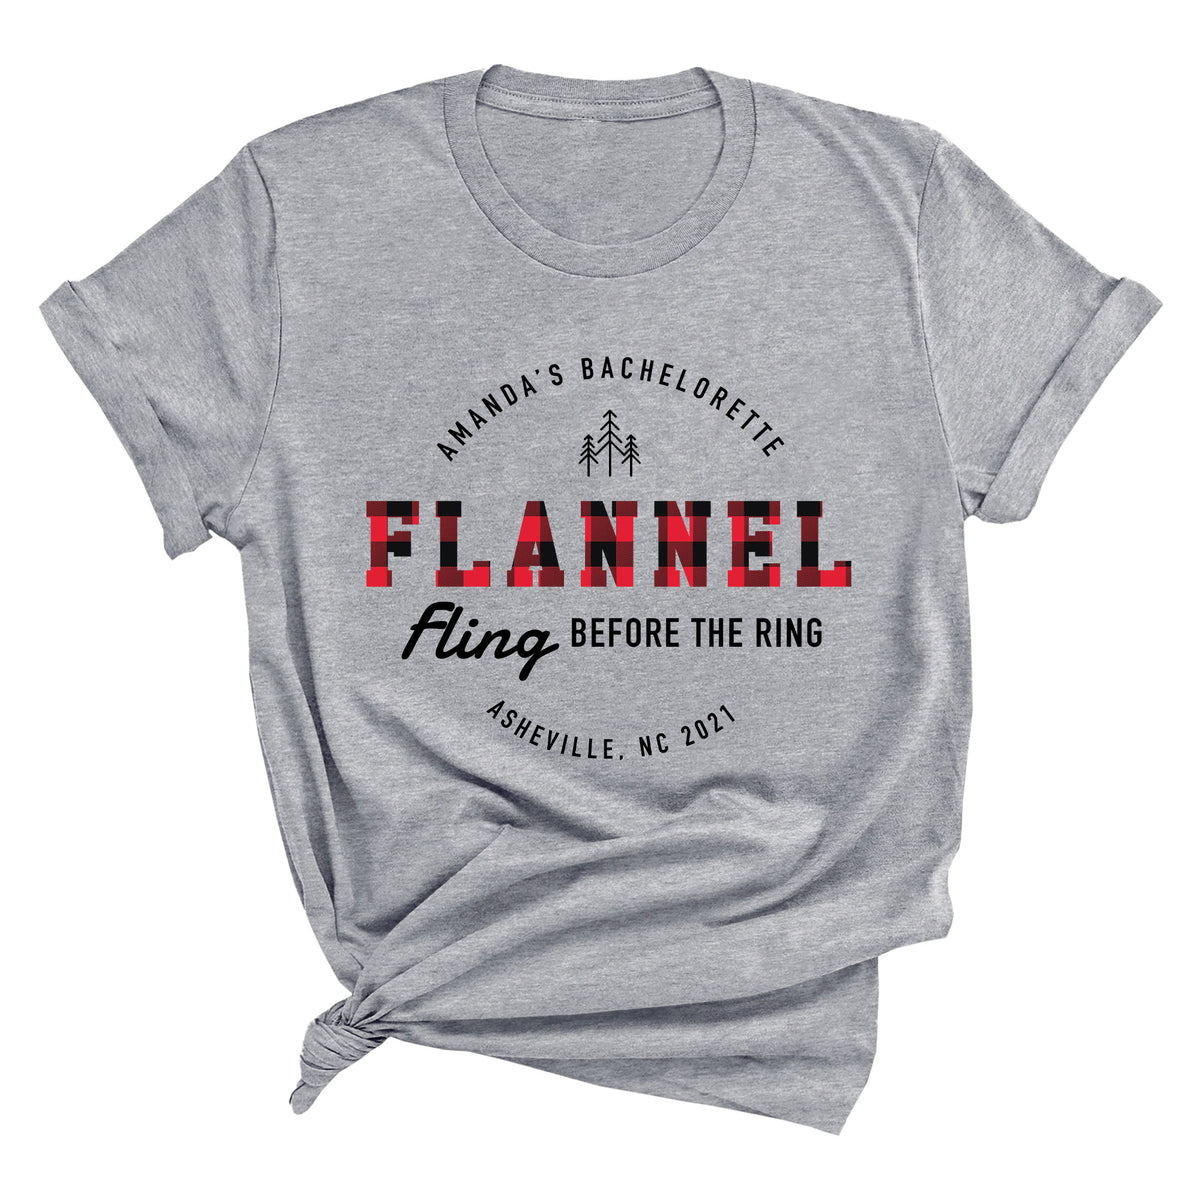 Flannel Fling Before the Ring with Custom Premium Unisex T-Shirt